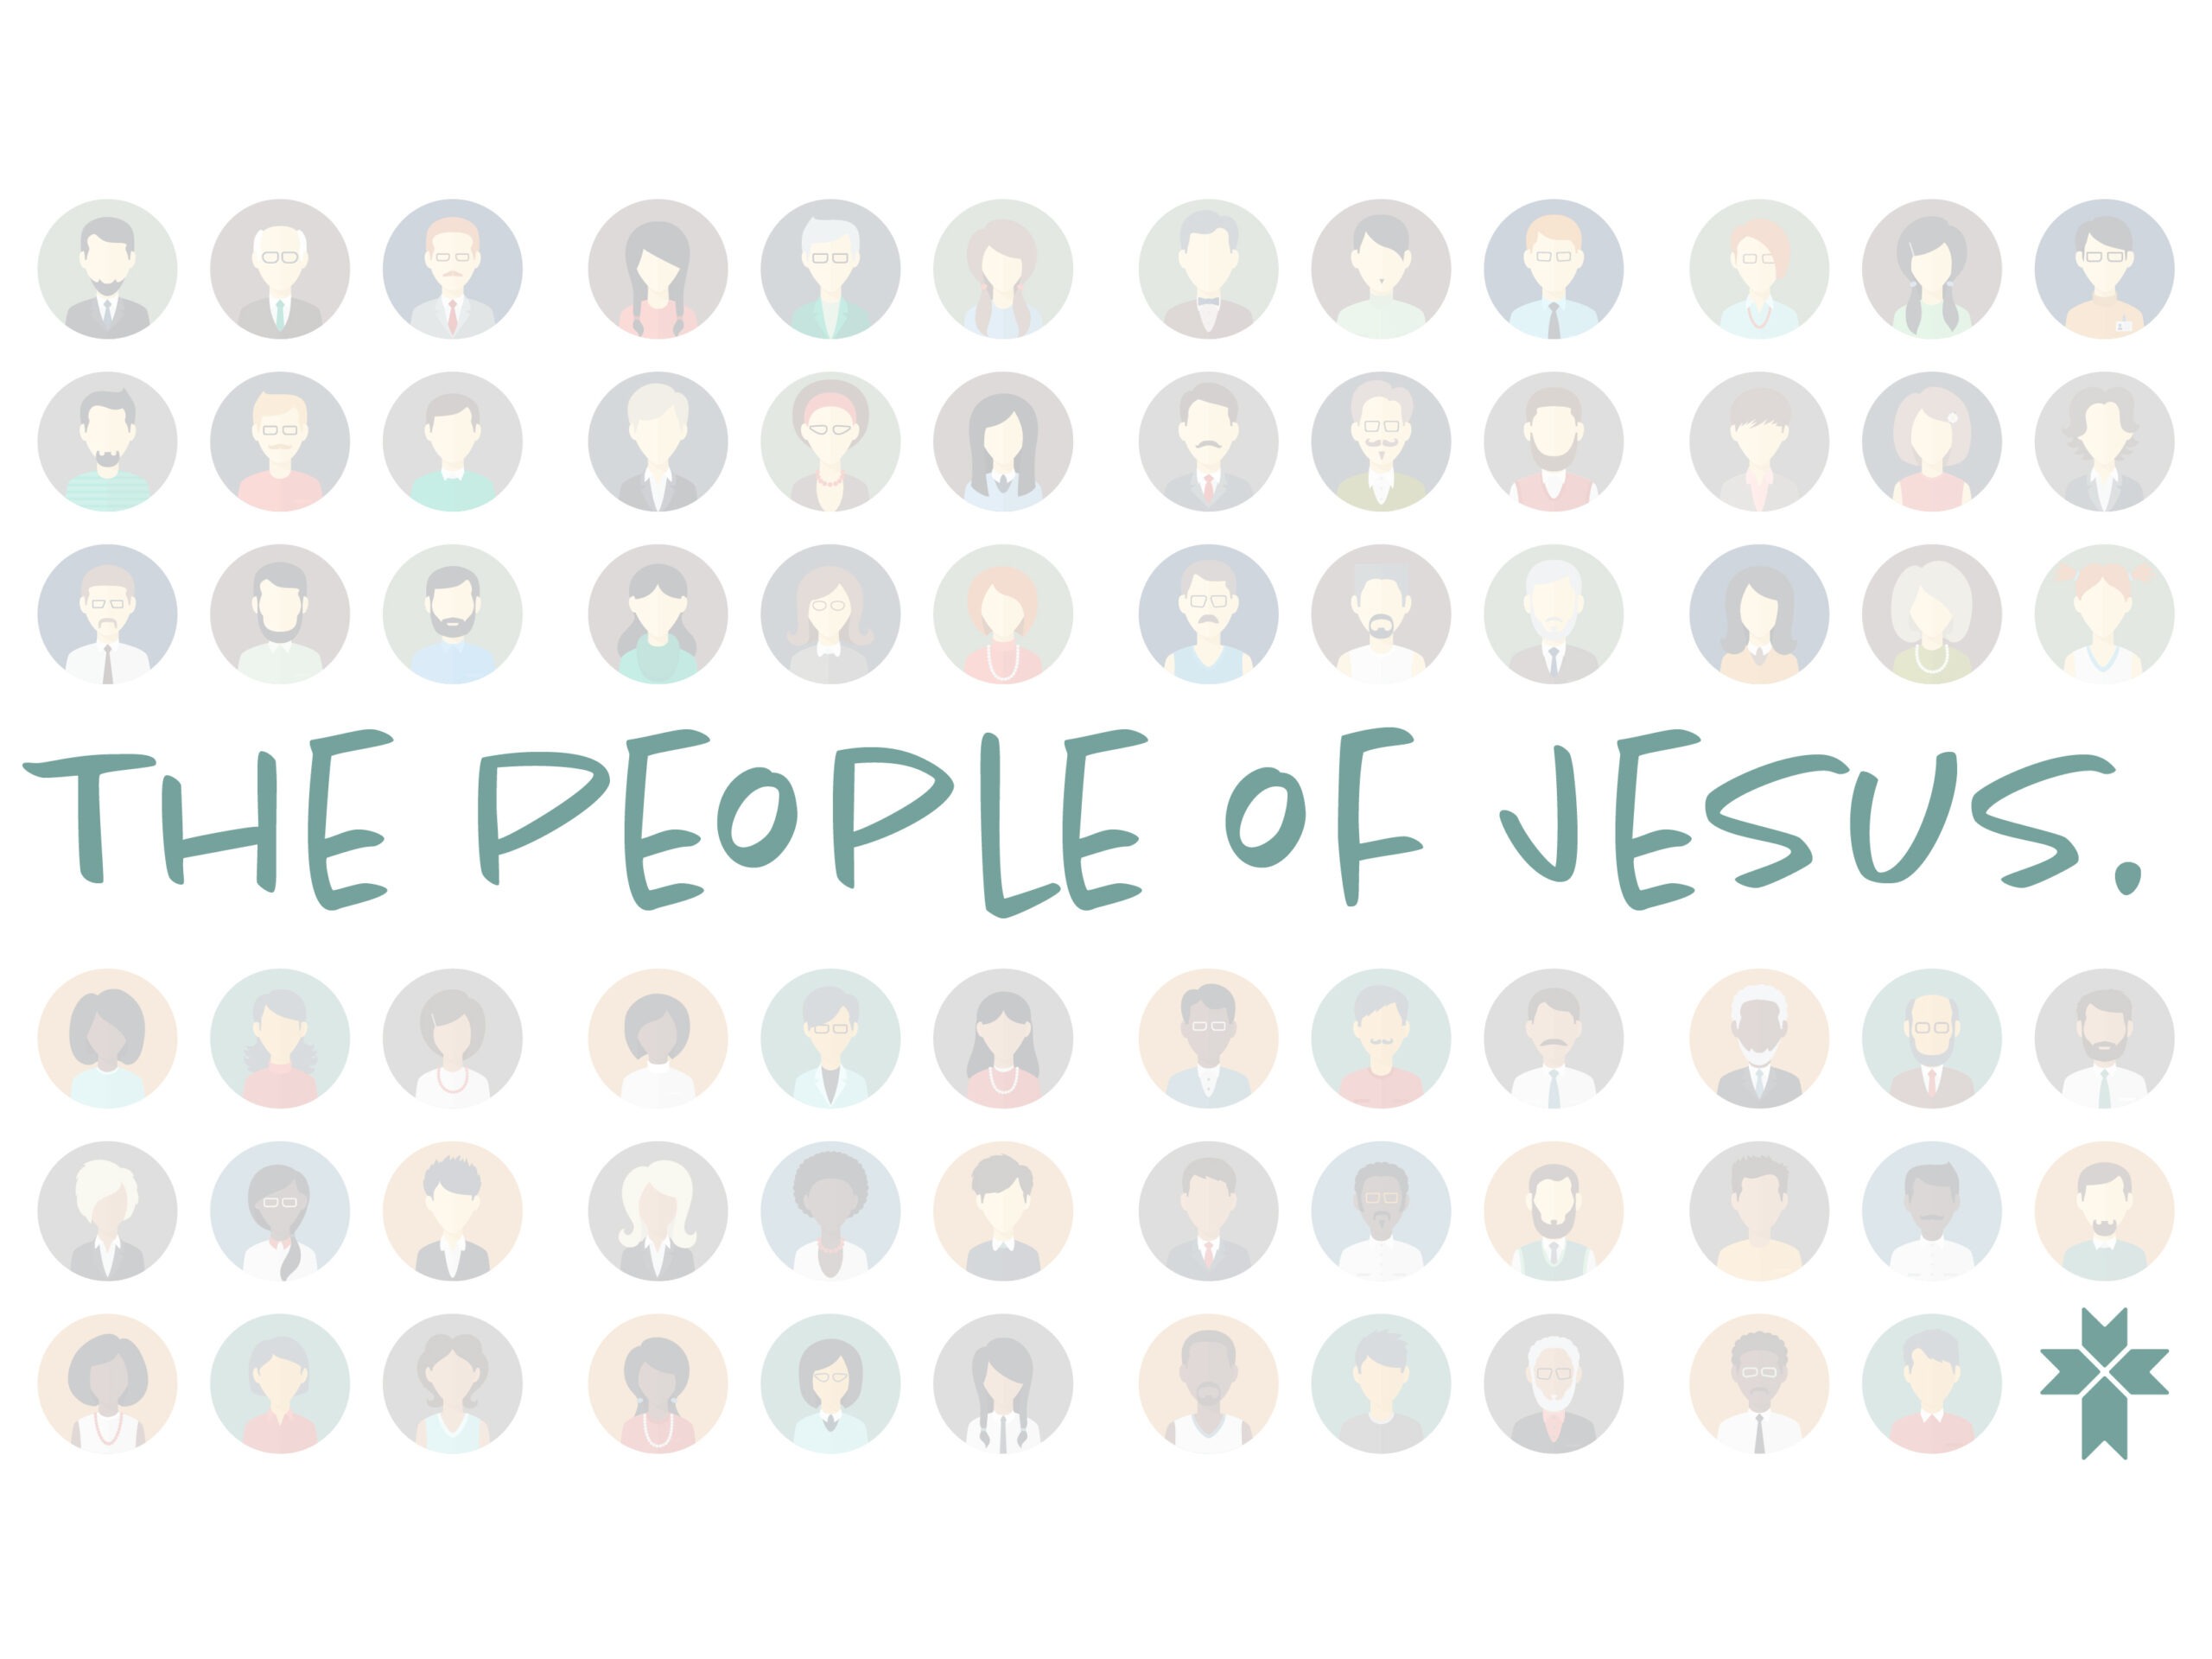 The People of Jesus are an Influence with the Gospel